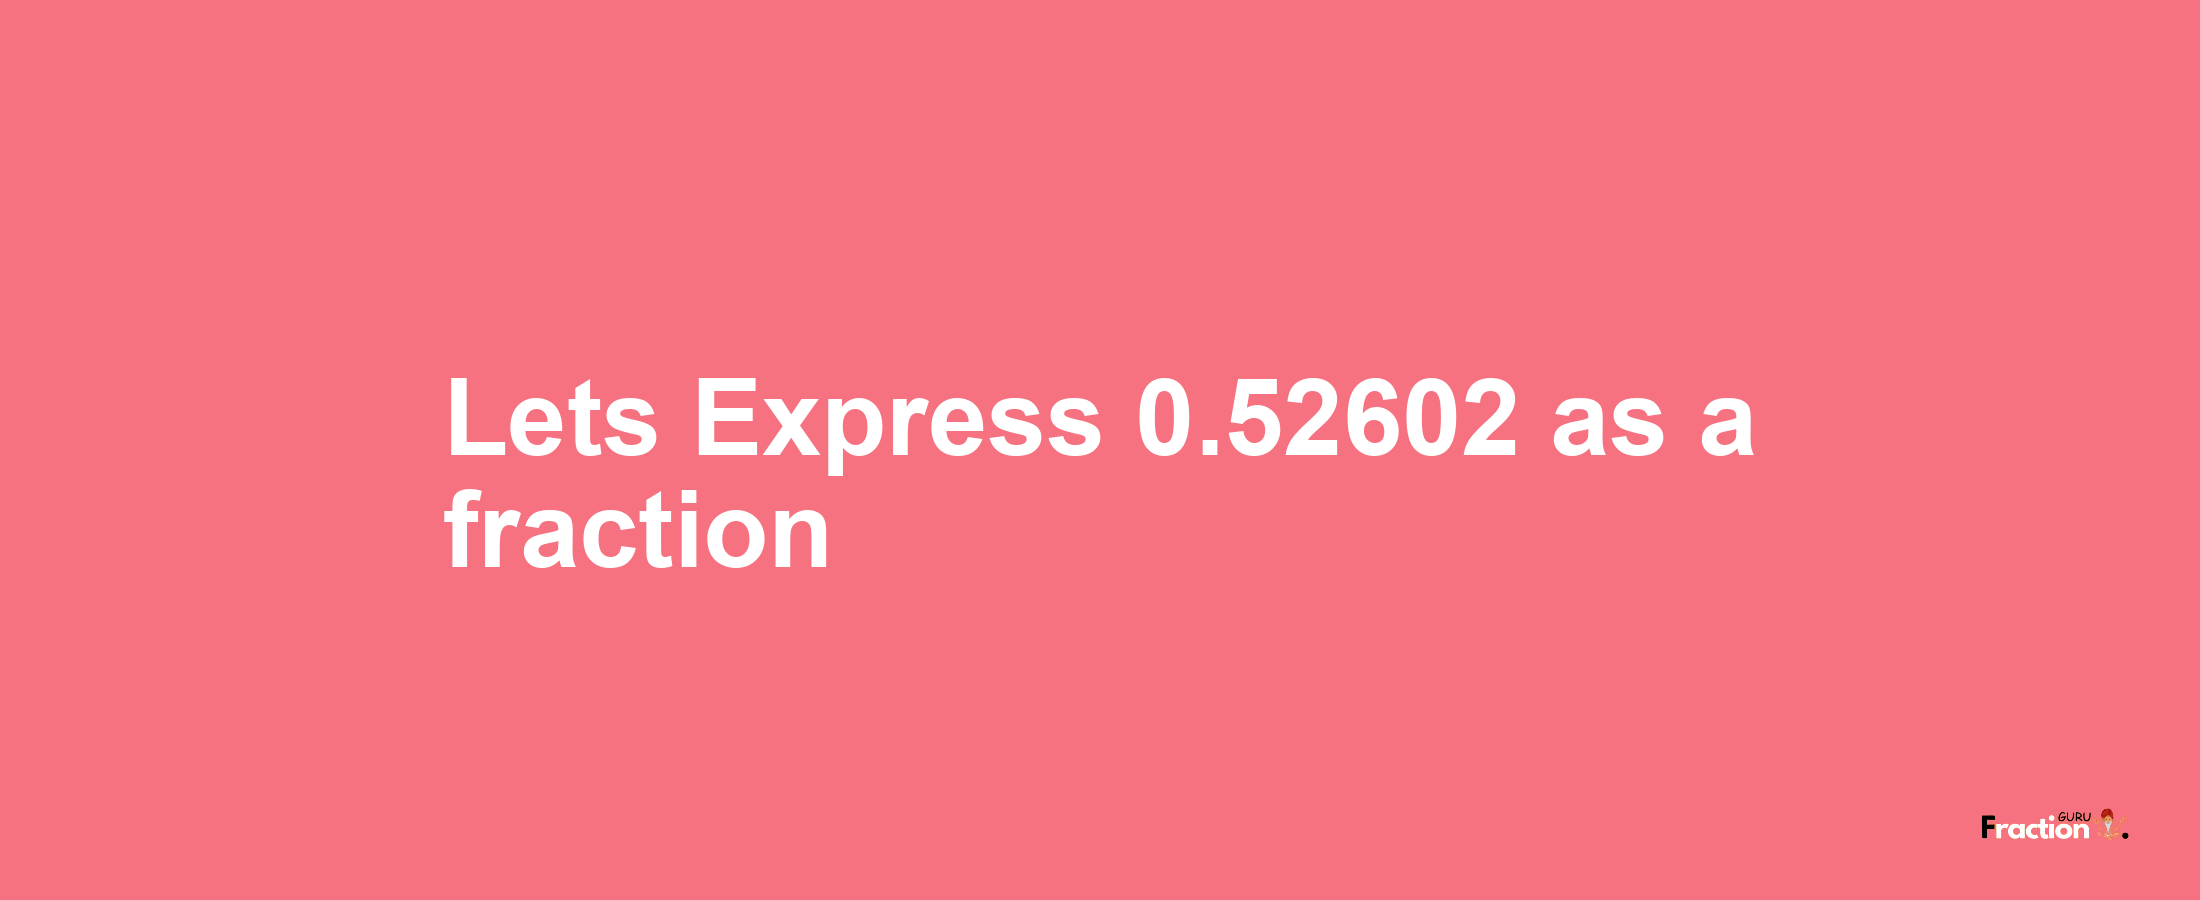 Lets Express 0.52602 as afraction